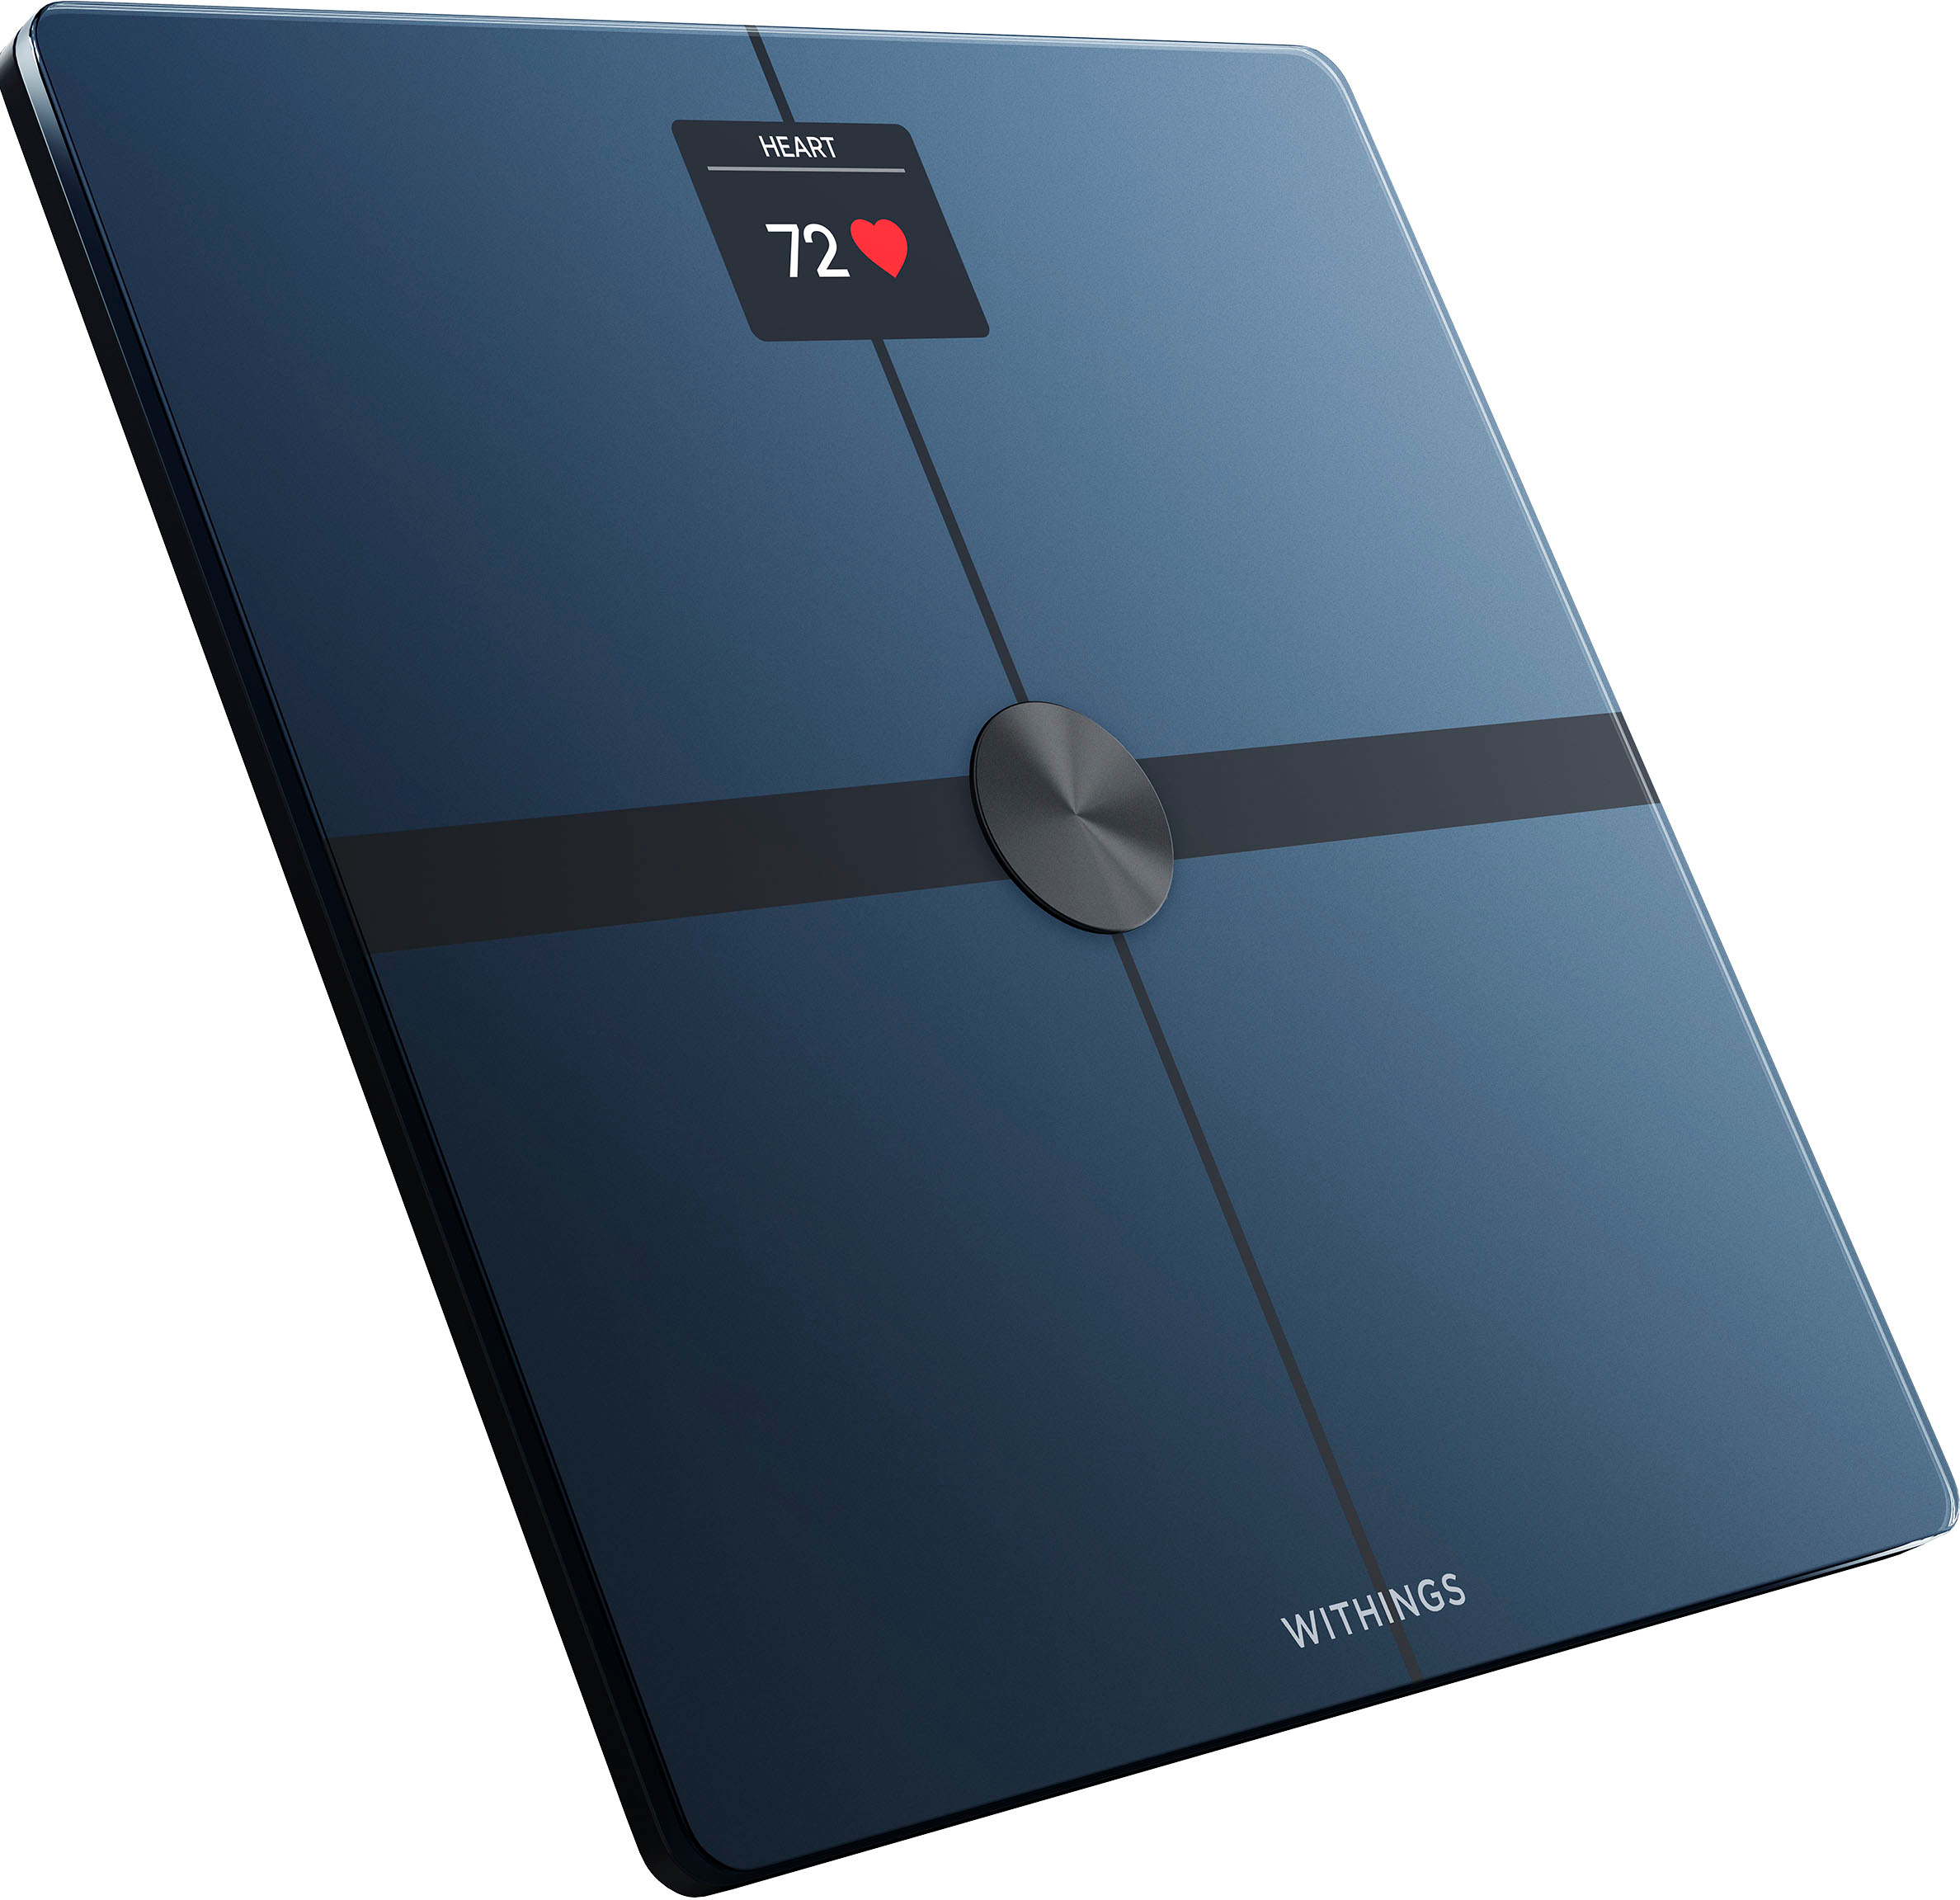 The most advanced smart scale from Withings cleared by FDA [U: Now  available] - 9to5Mac